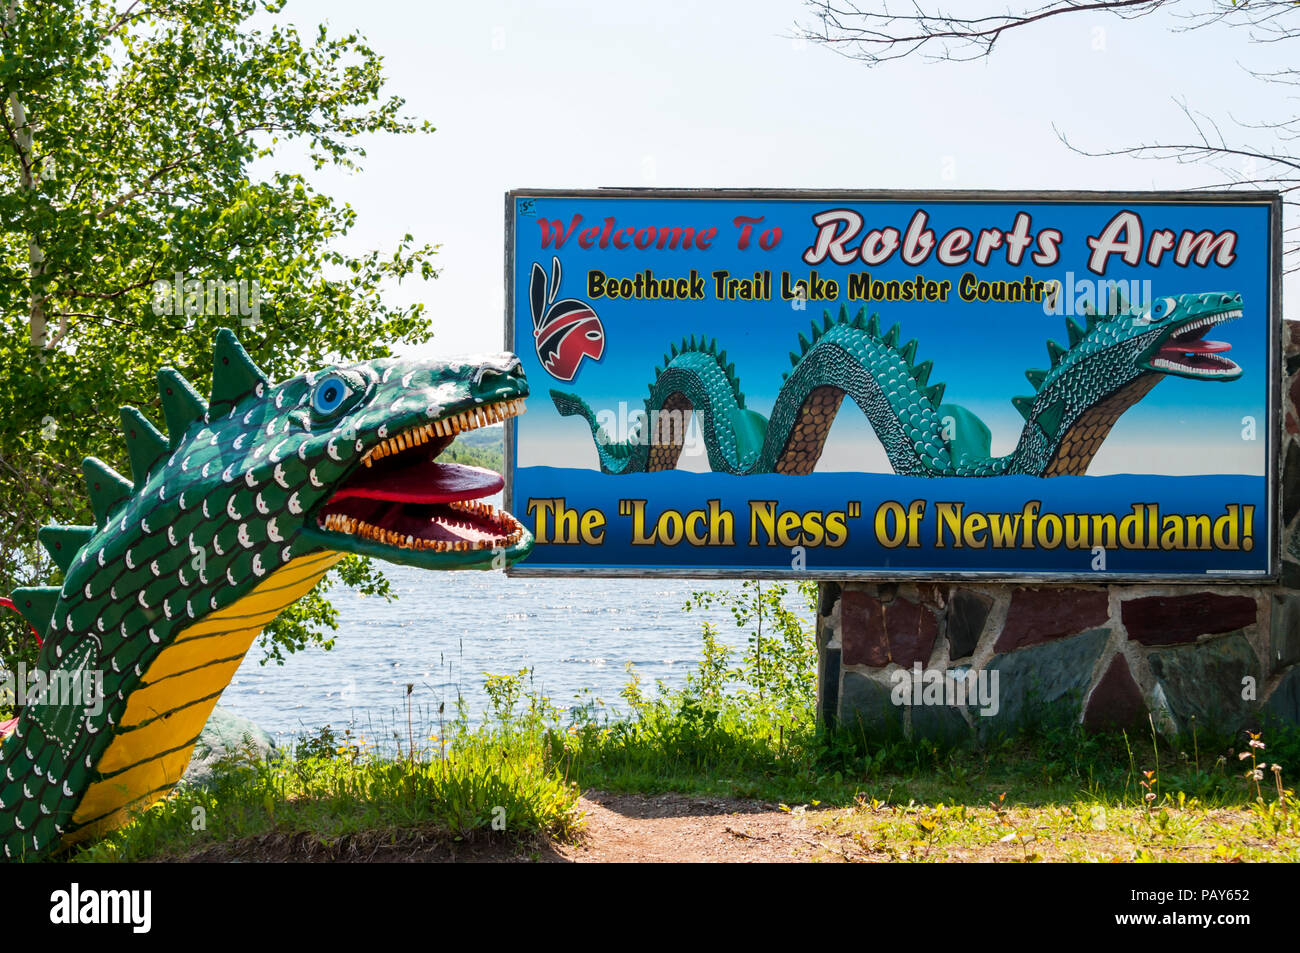 A sign at Roberts Arm on Crescent Lake, Newfoundland, has a picture and model of Cressie the legendary monster said to inhabit the lake. Stock Photo